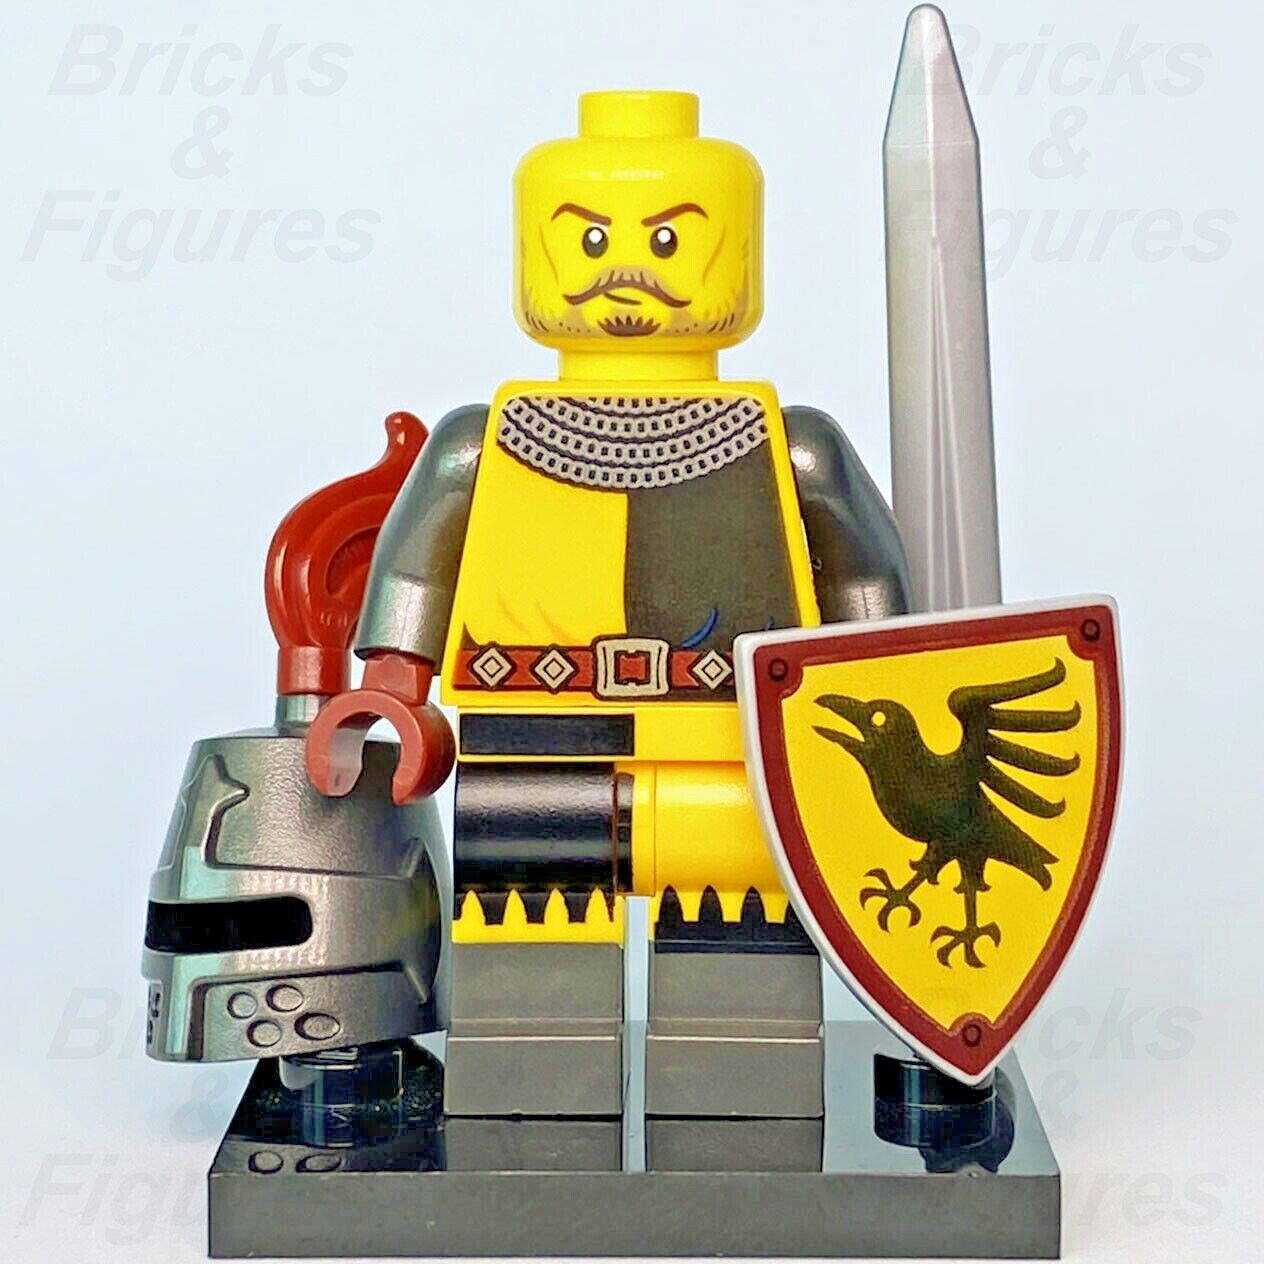 LEGO Tournament Knight Collectible Minifigures Series 20 Minifig 71027 col20-4 - Bricks & Figures